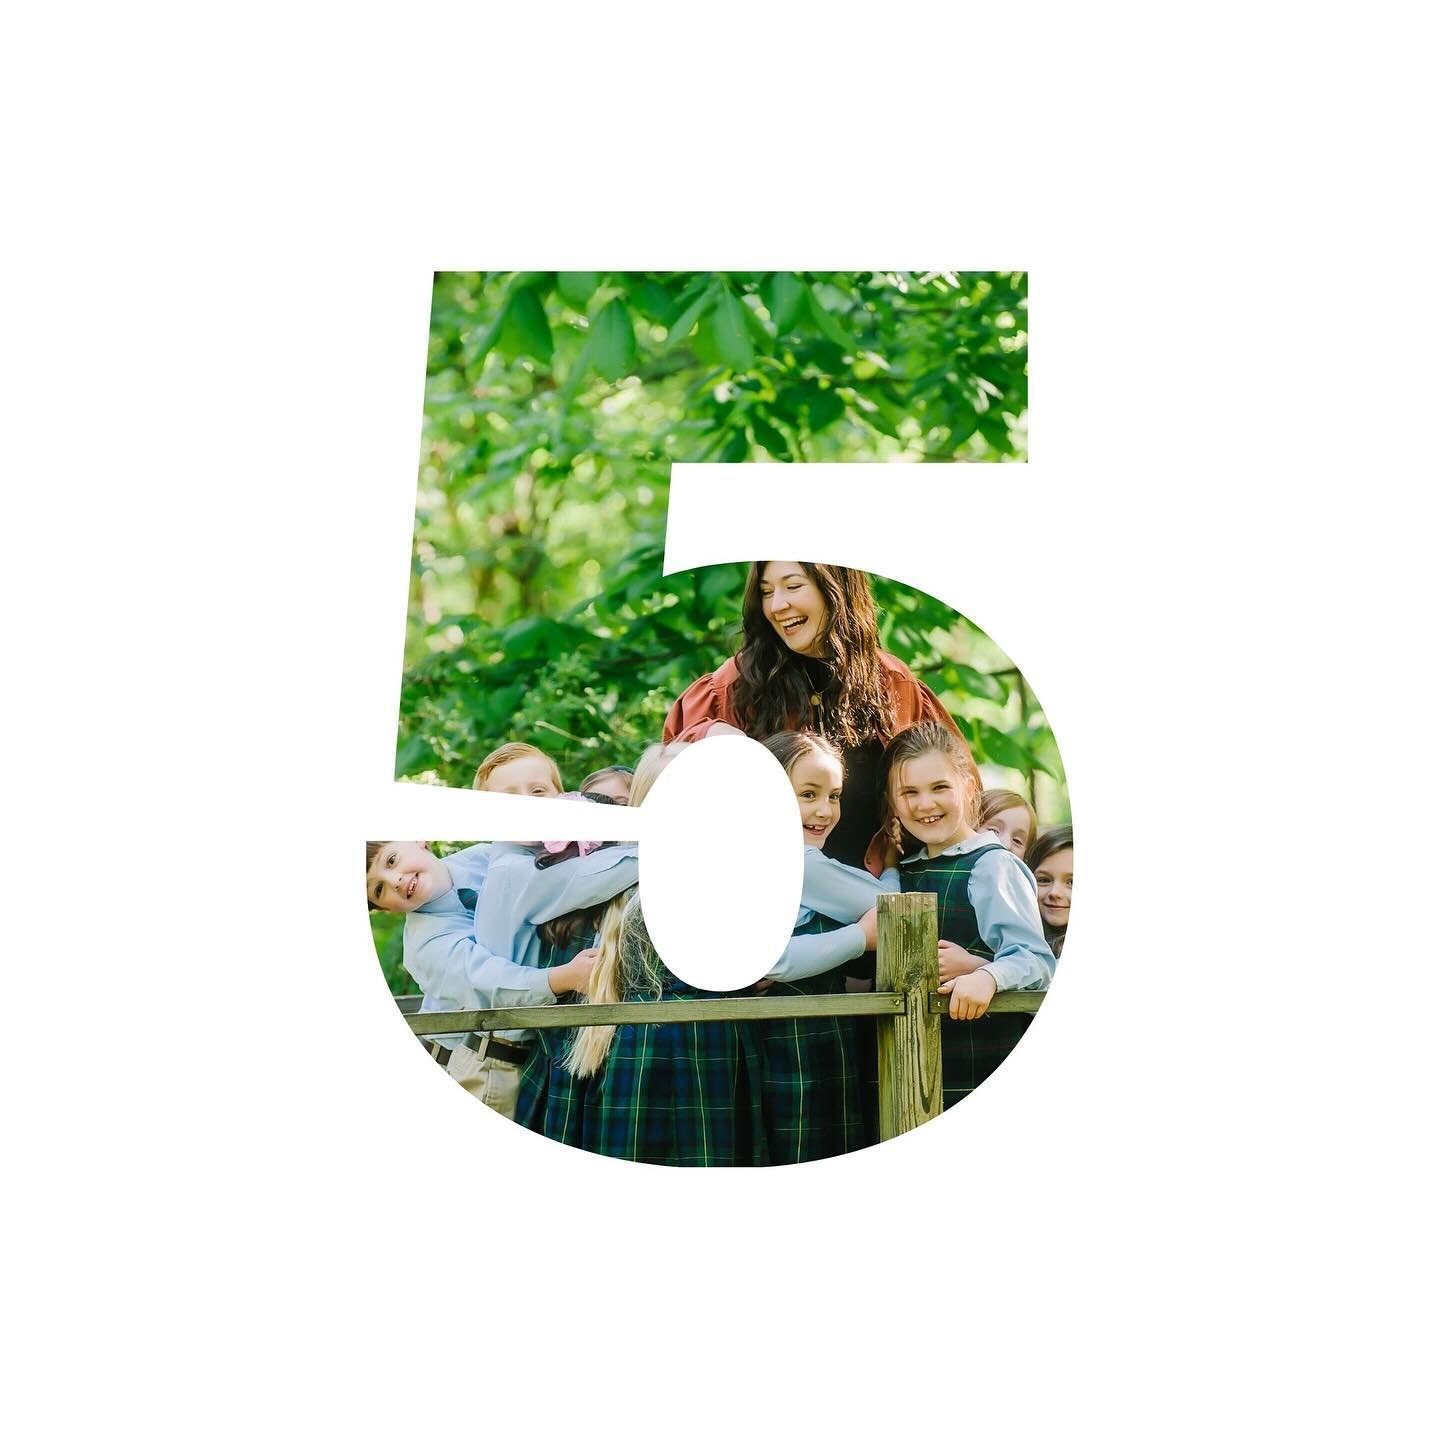 The countdown is on! 🥳 The Spring Soiree 2024 silent auction goes *L I V E* in just 5 days!! 

How does it work?

- Follow the link in our profile to register. PRO TIP: If you&rsquo;ve bid on items in the past, just sign in to your existing account 